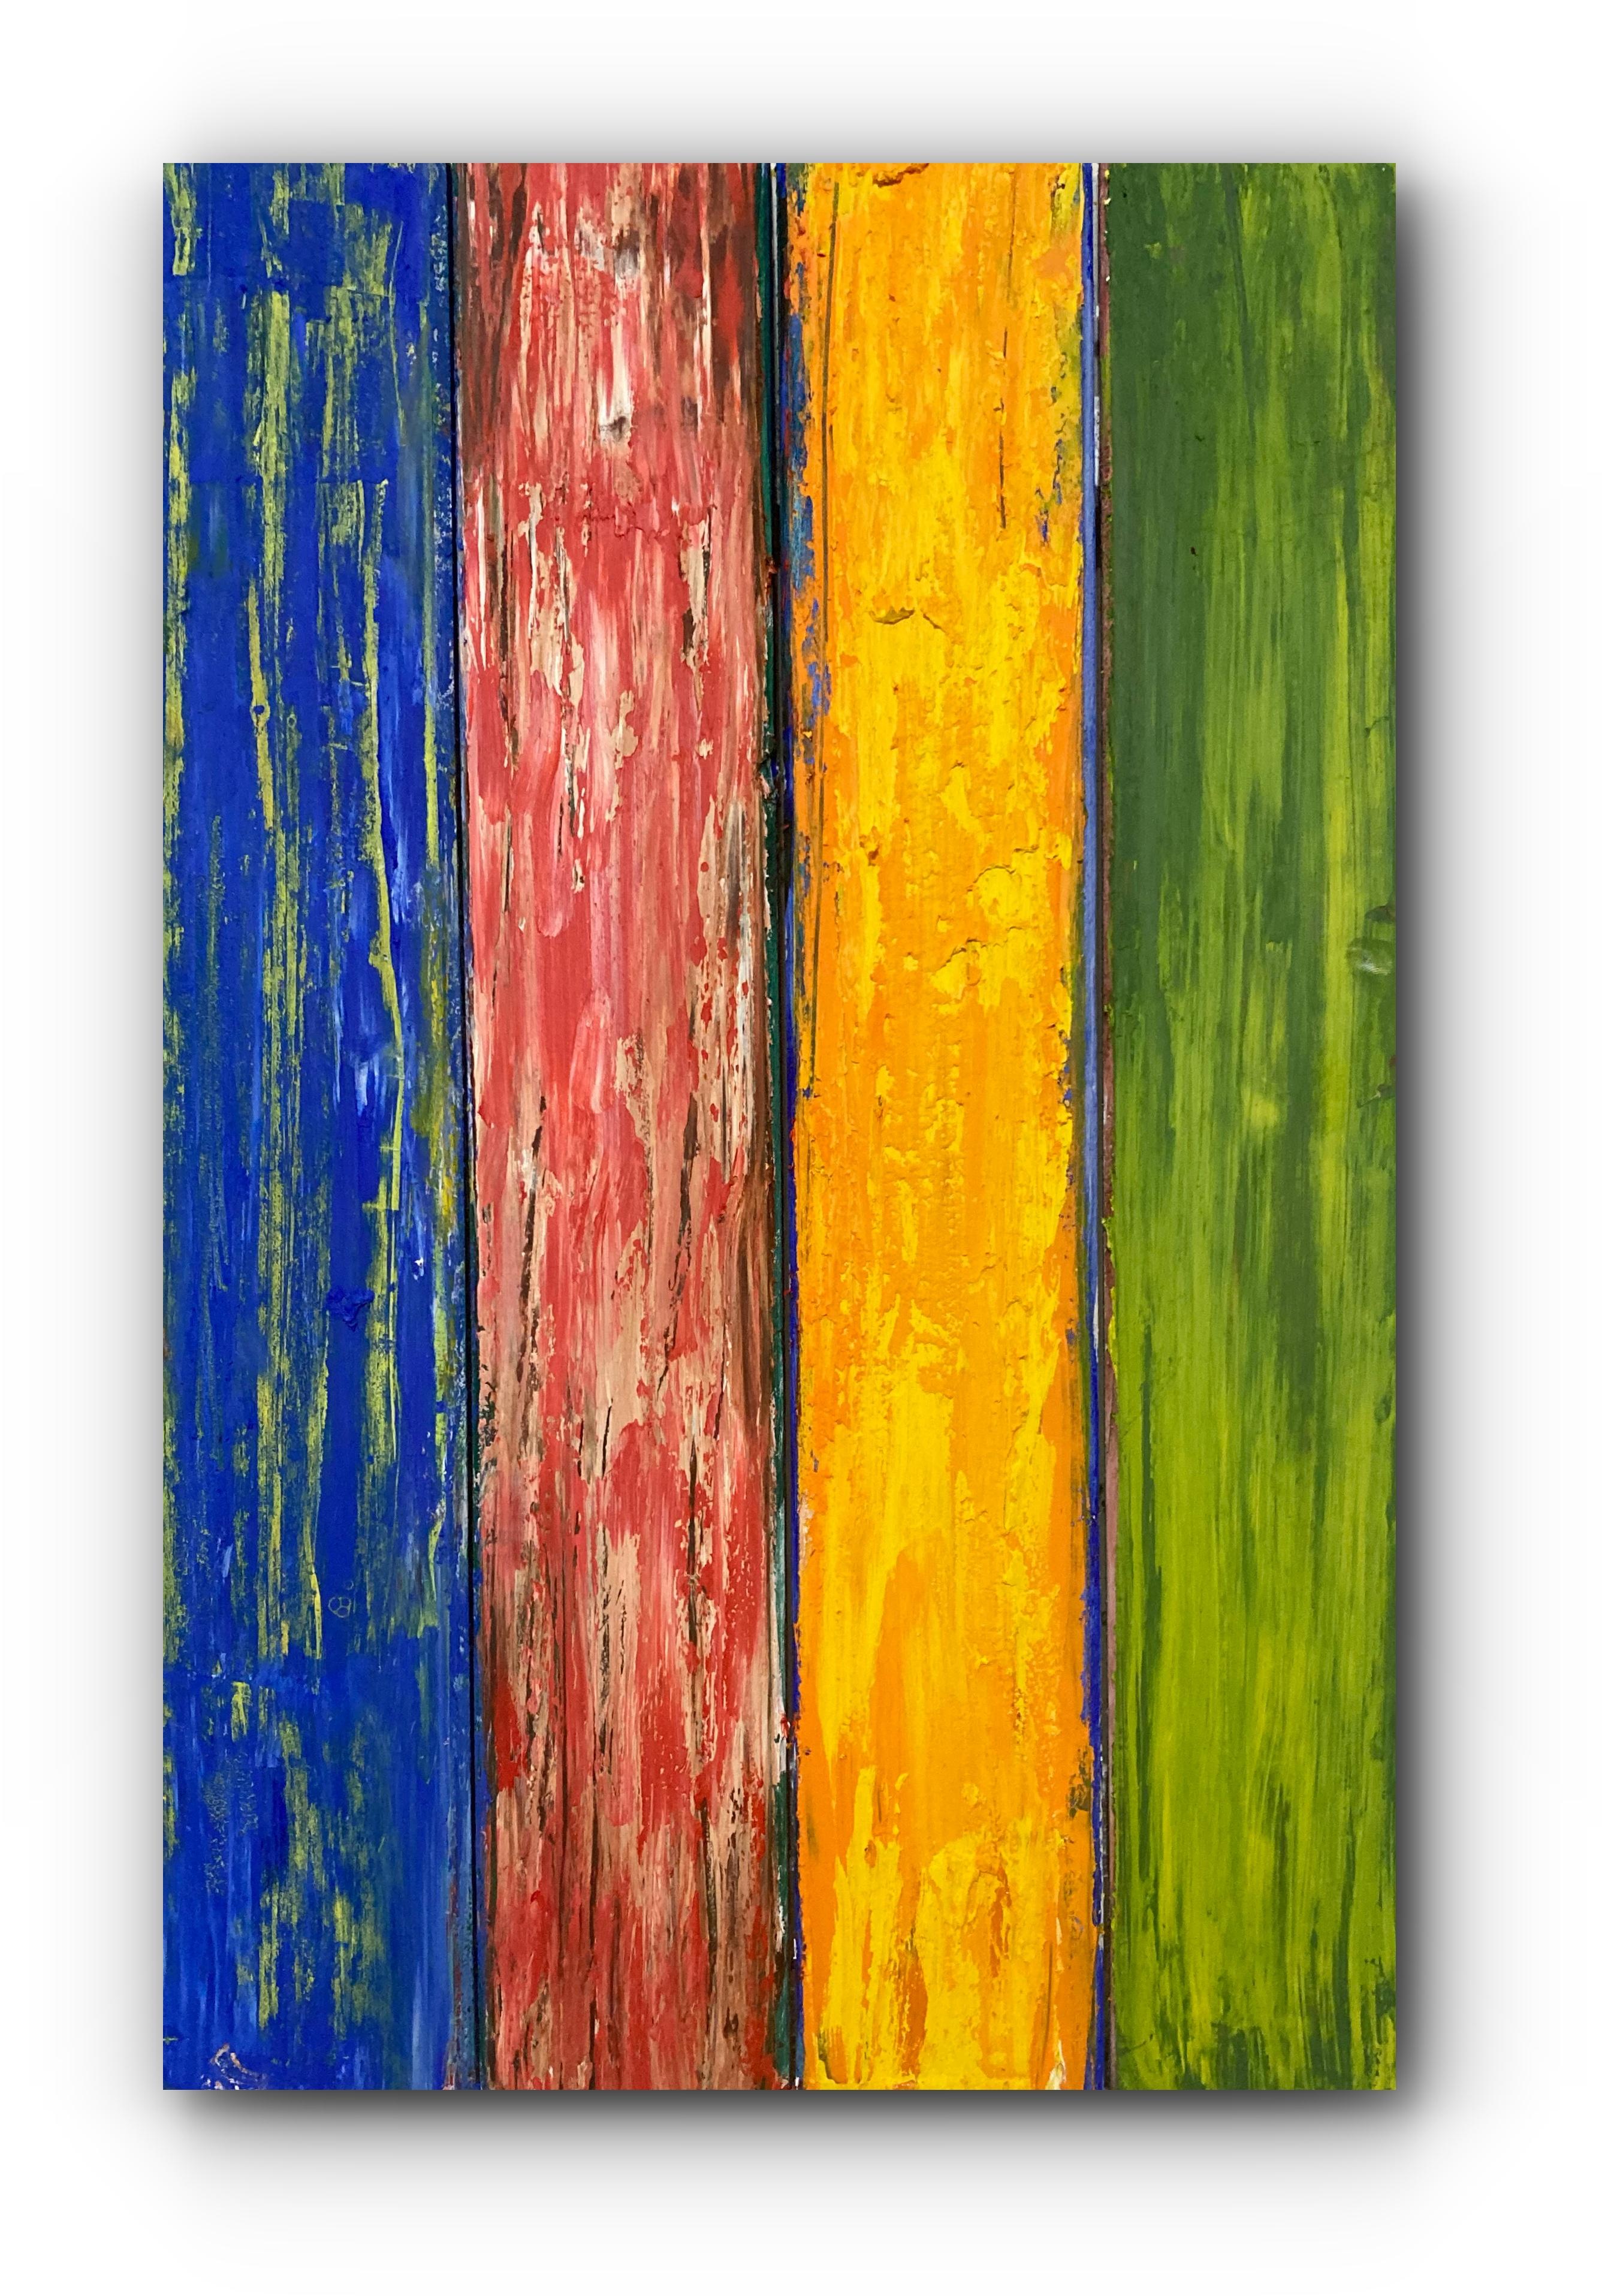 Balance of Power (Quadriptych Wood Panel Contemporary Abstract Painting)